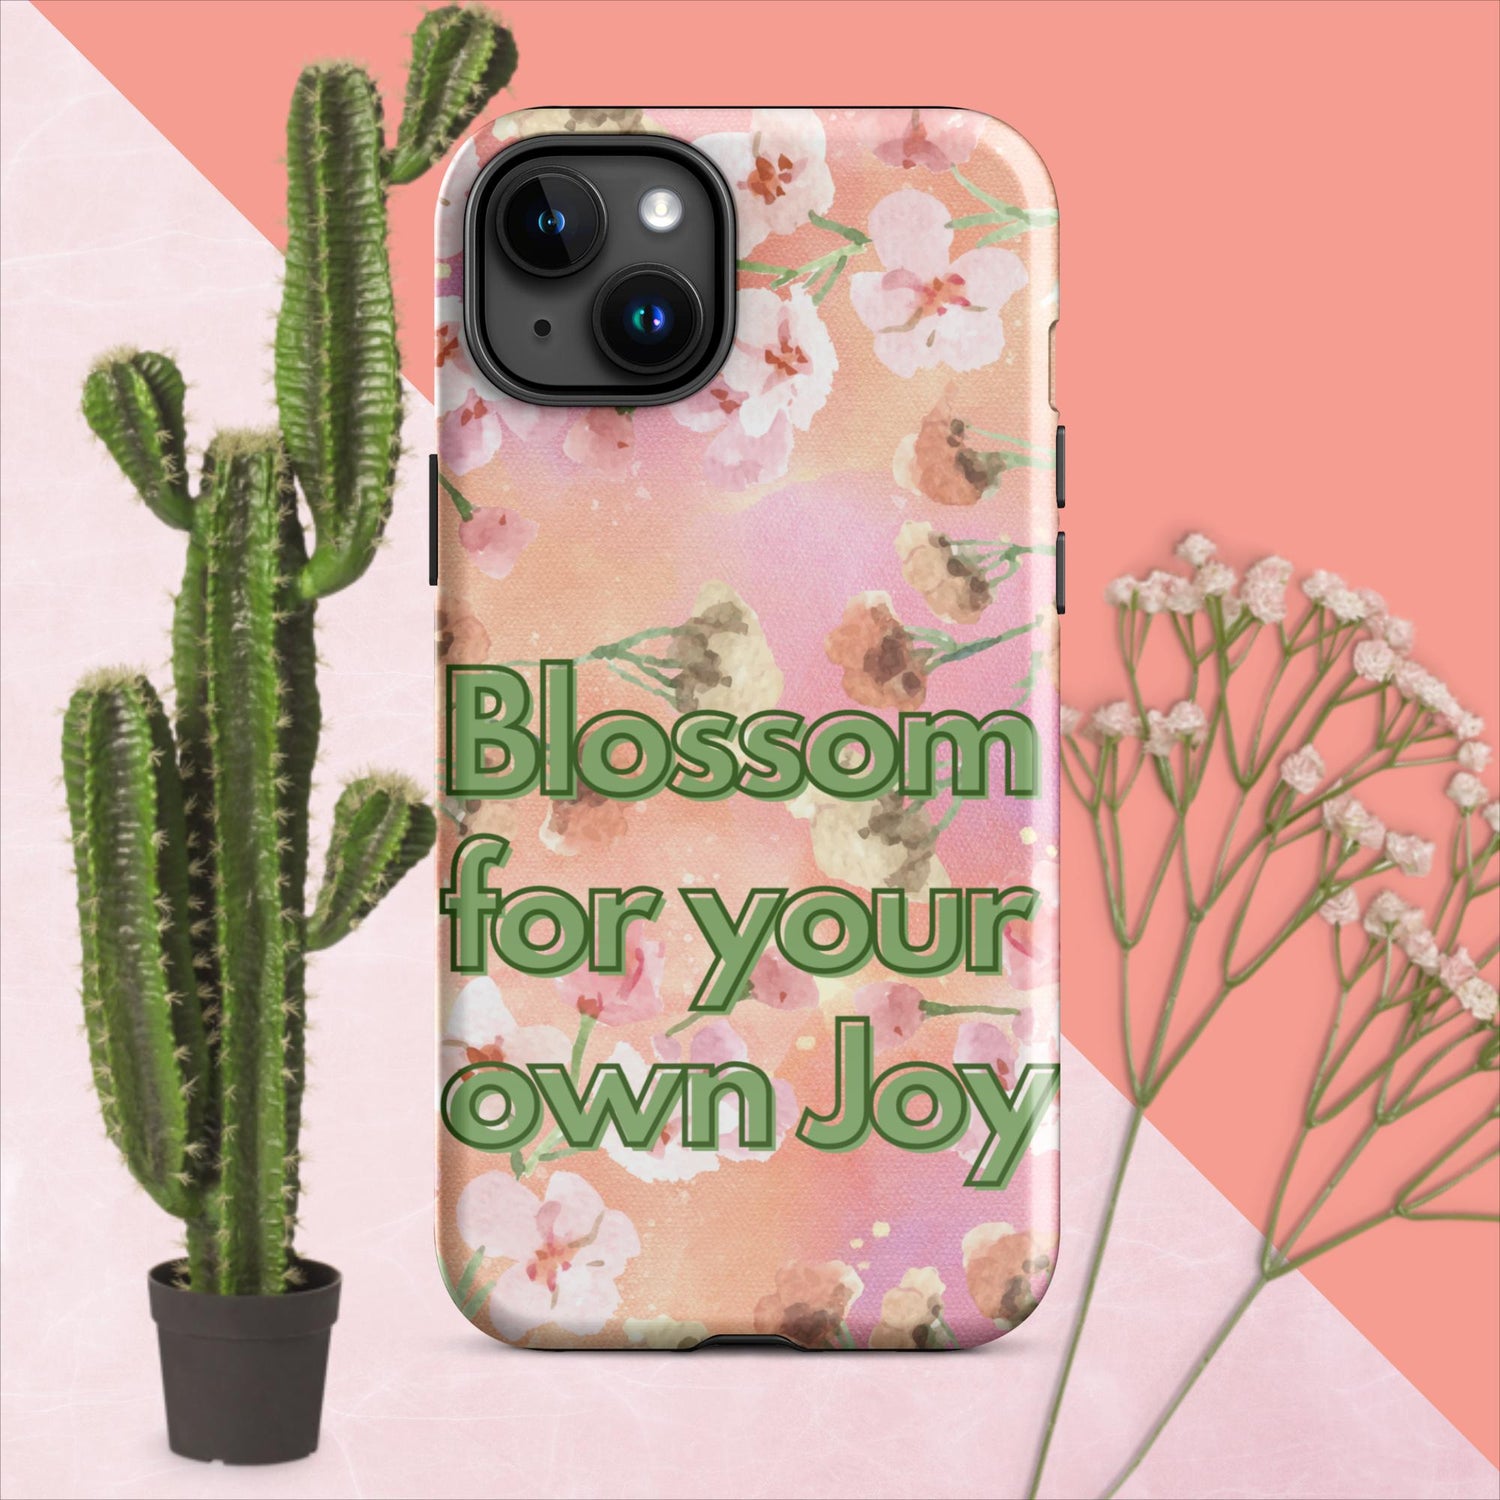 Blossom for your Own Joy - Iphone Case